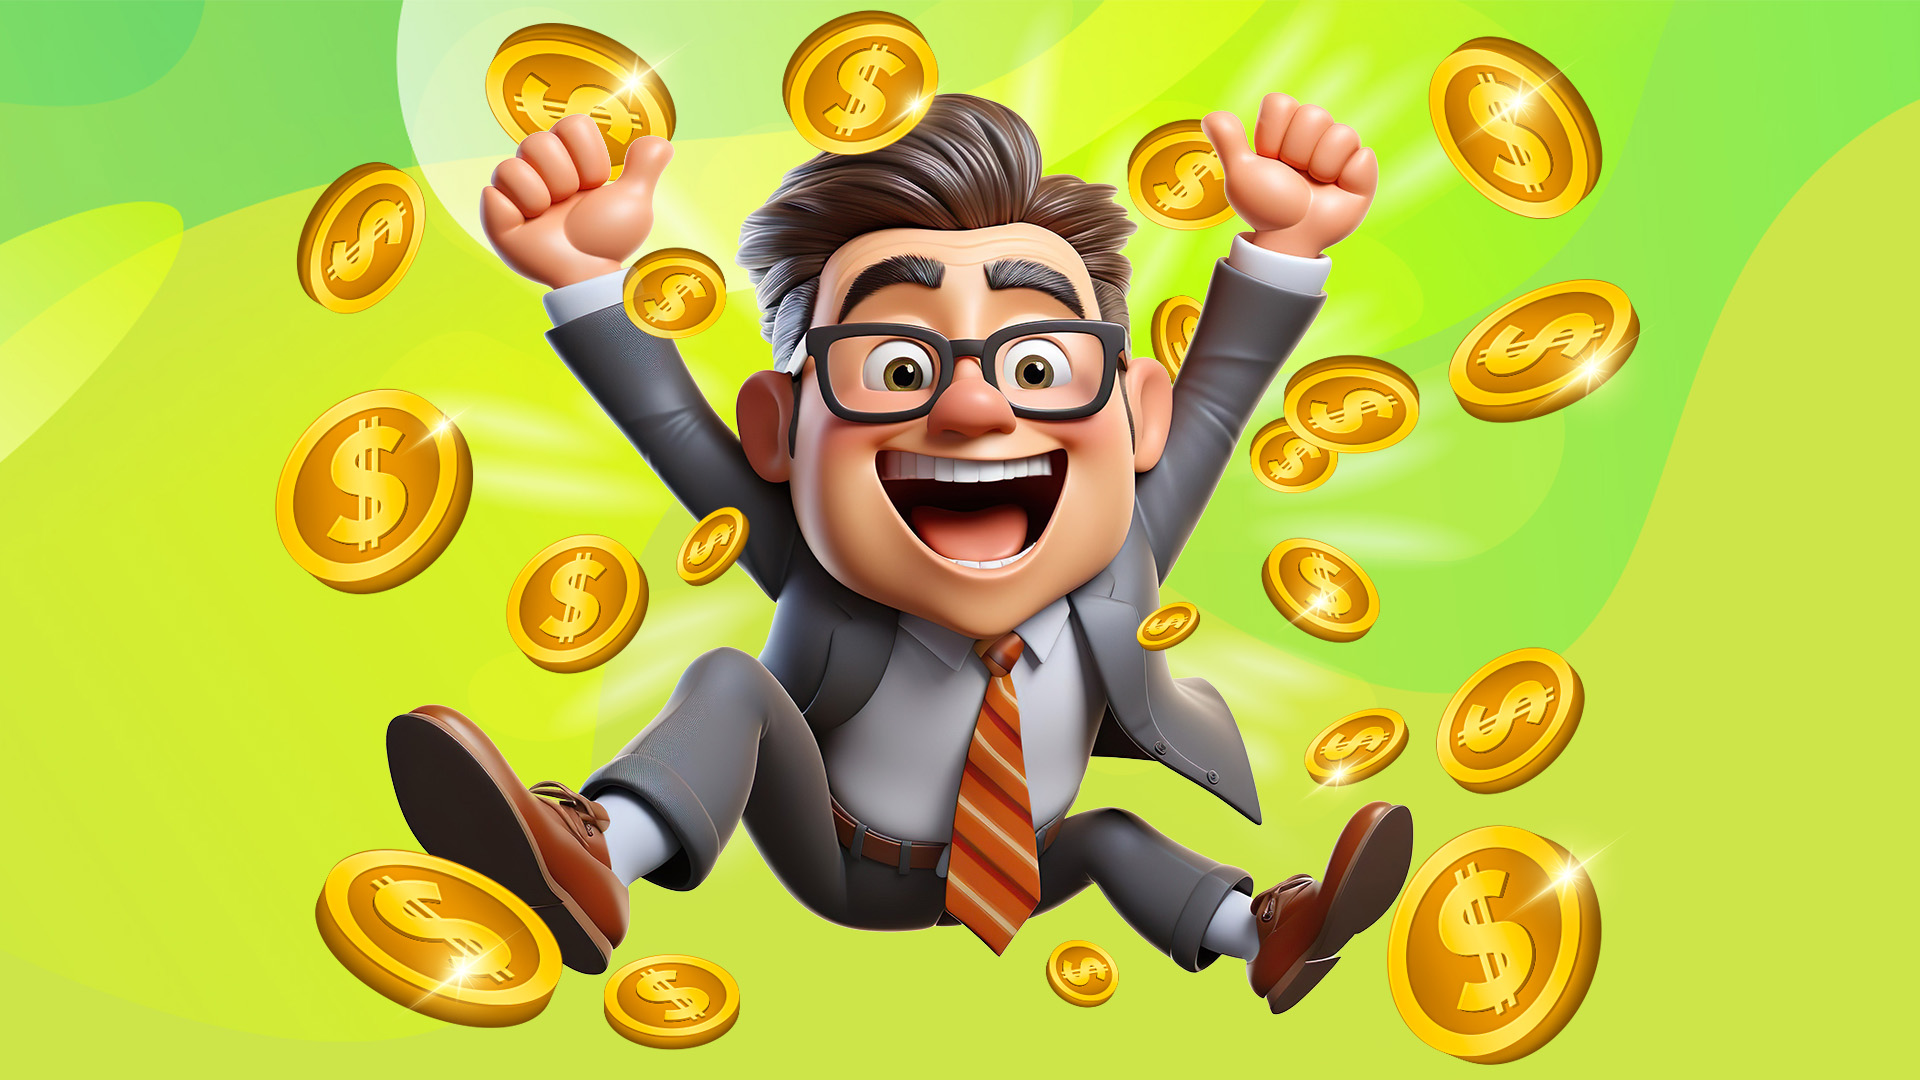 A cartoon man in suit and glasses, representing our big slots winners, jumps in the air, surrounded by gold coins, set against a lime green background.